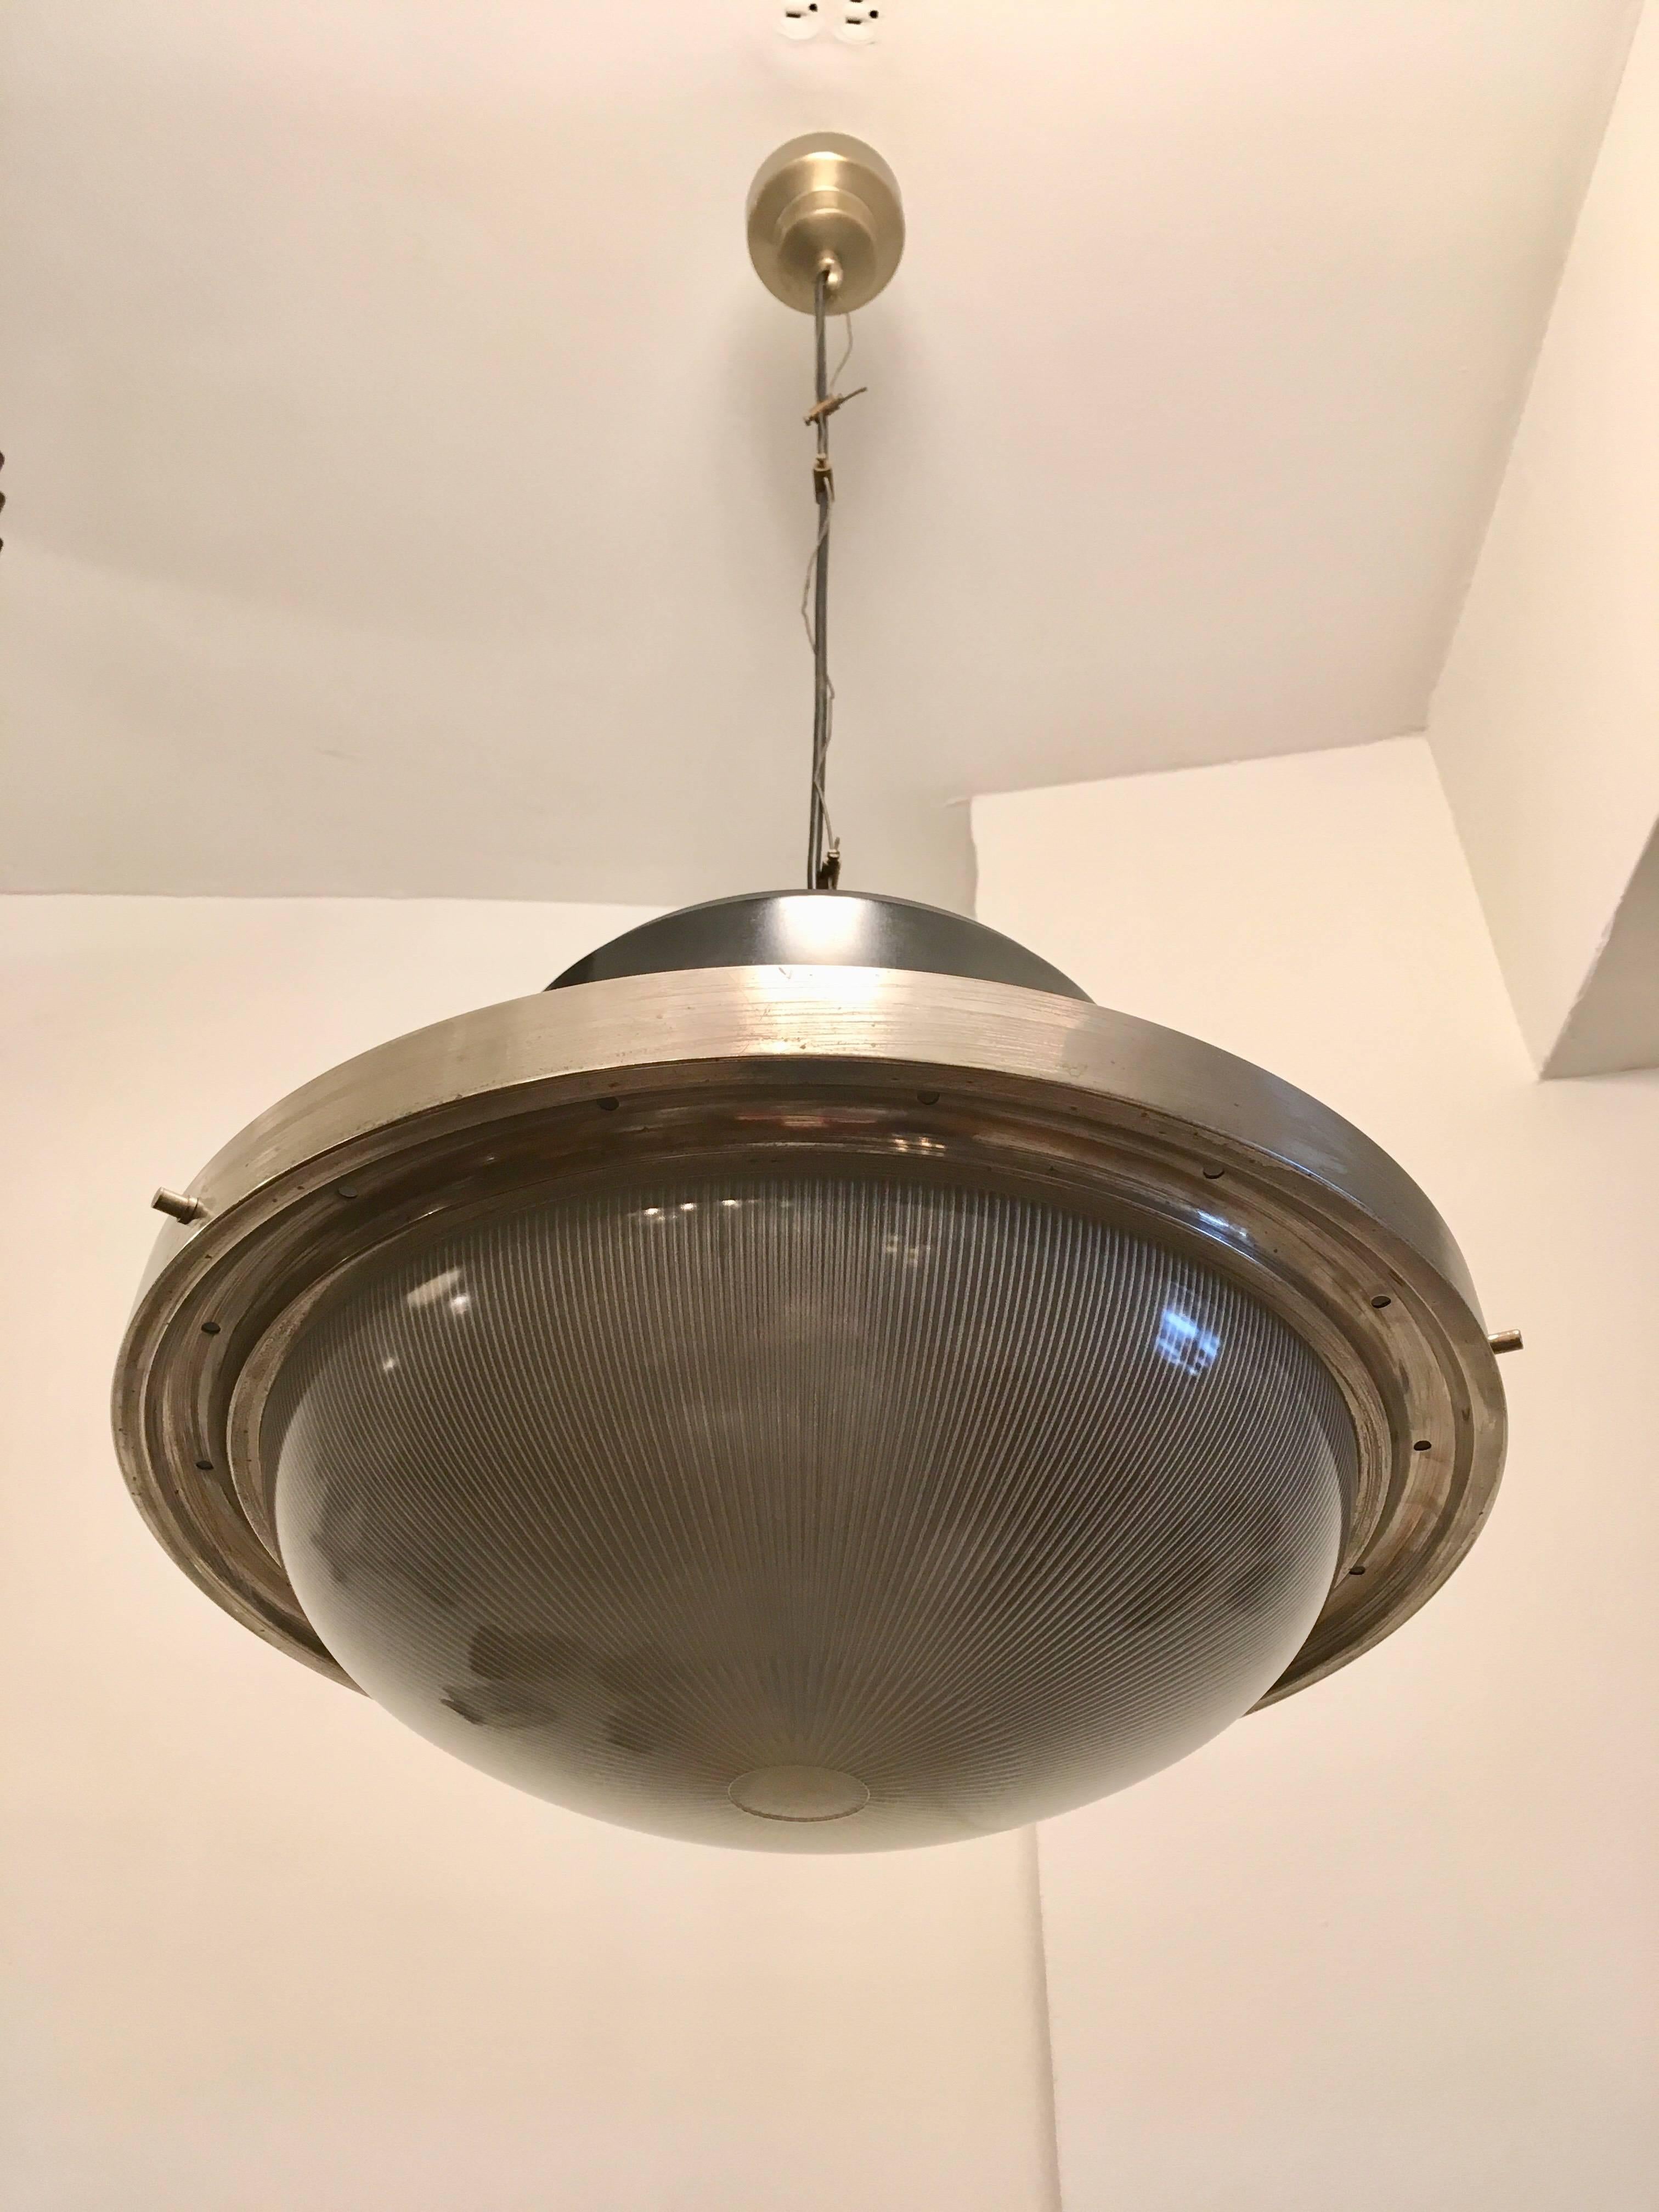 An original 1960s Italian pendant designed by Sergio Mazza for Artemide. The Tau model is composed of a black enamels and brushed steel fixture with an industrial glass shade. Newly rewired. A second available if needed.